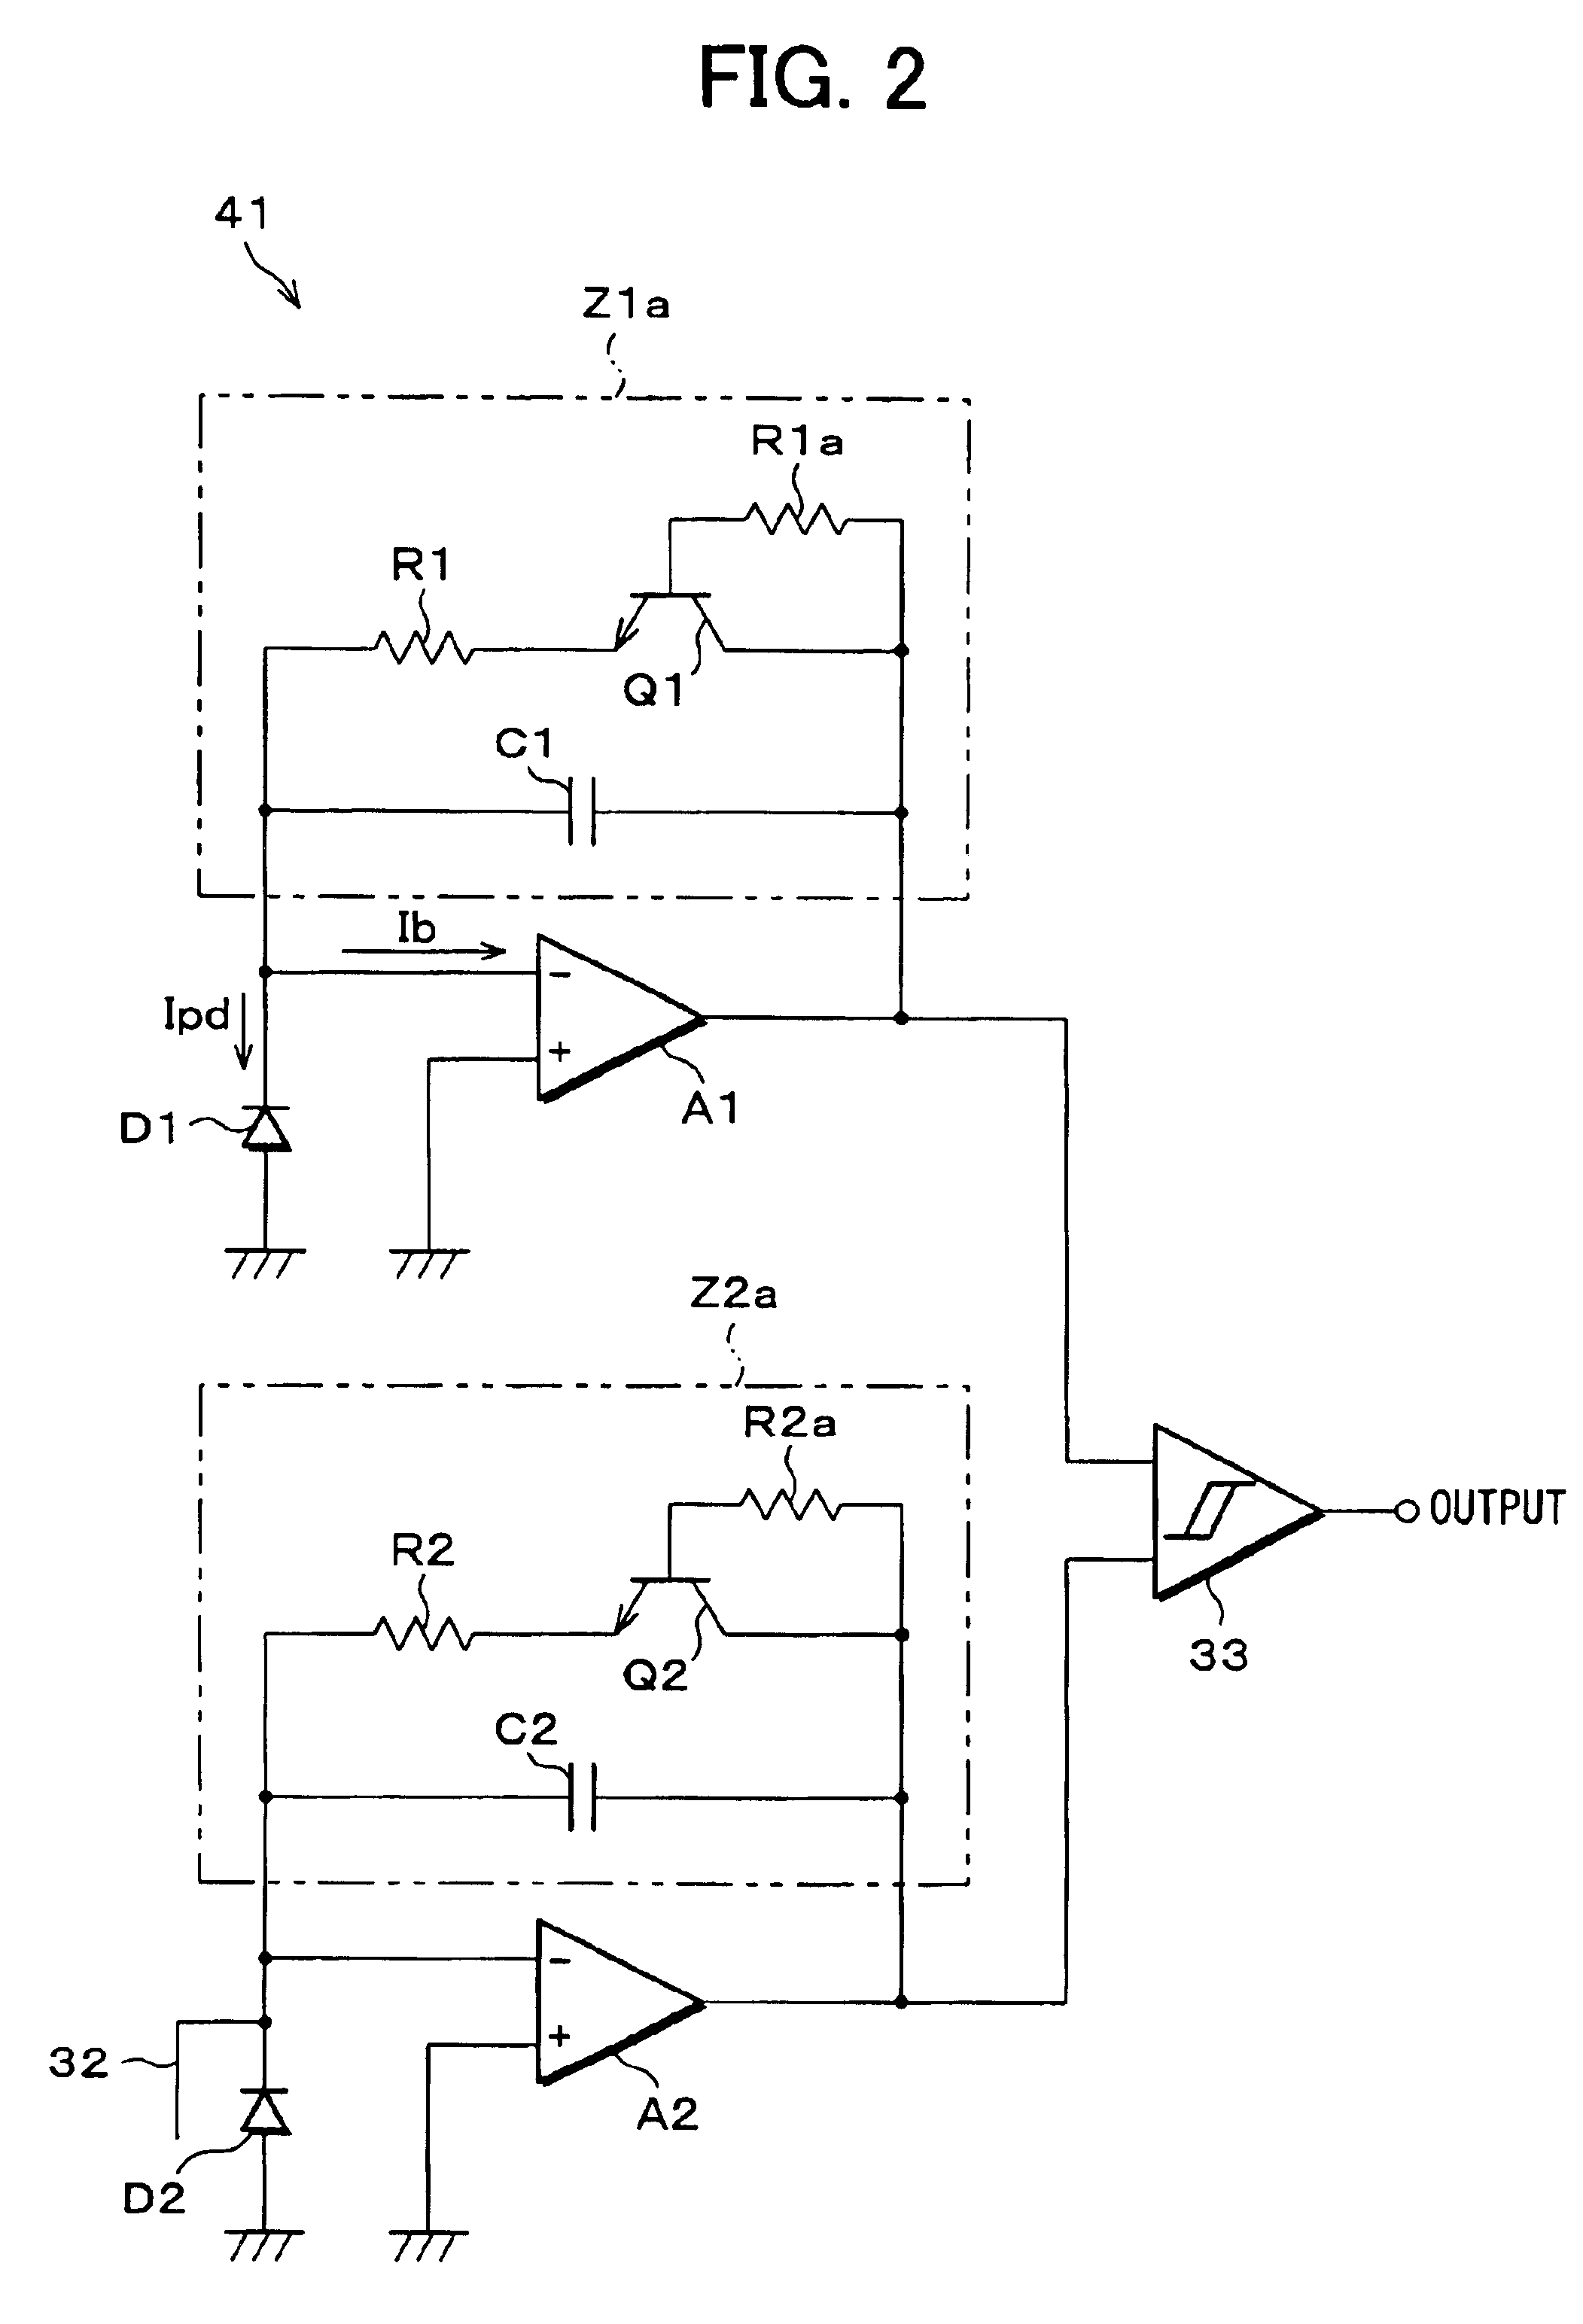 Optical coupling device and light-receiving circuit of same